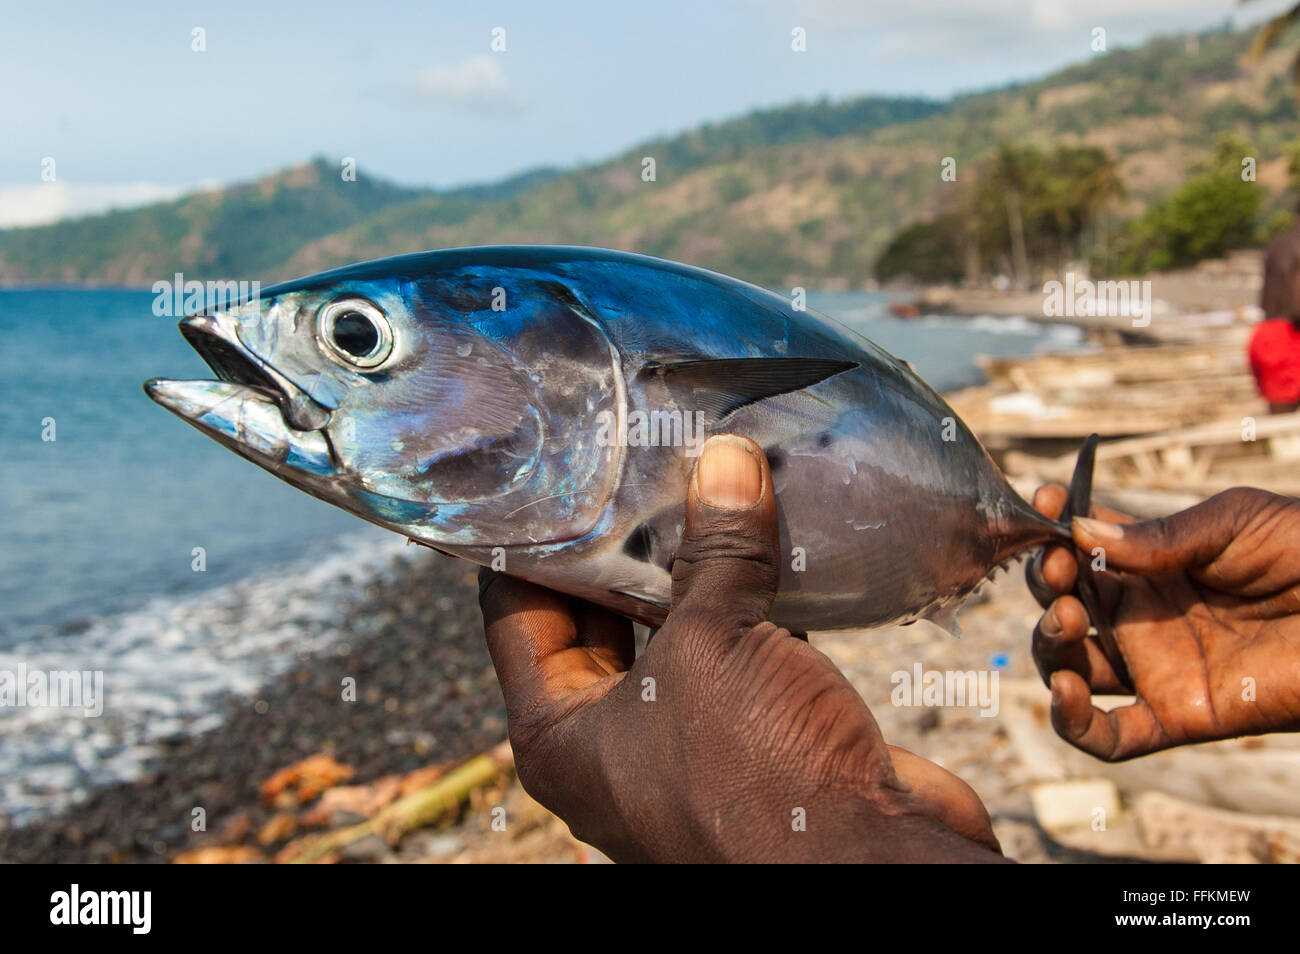 Freshly caught Albacore tuna on the hands of a local fisherman. Beach, sea and palm trees in the background. Stock Photo